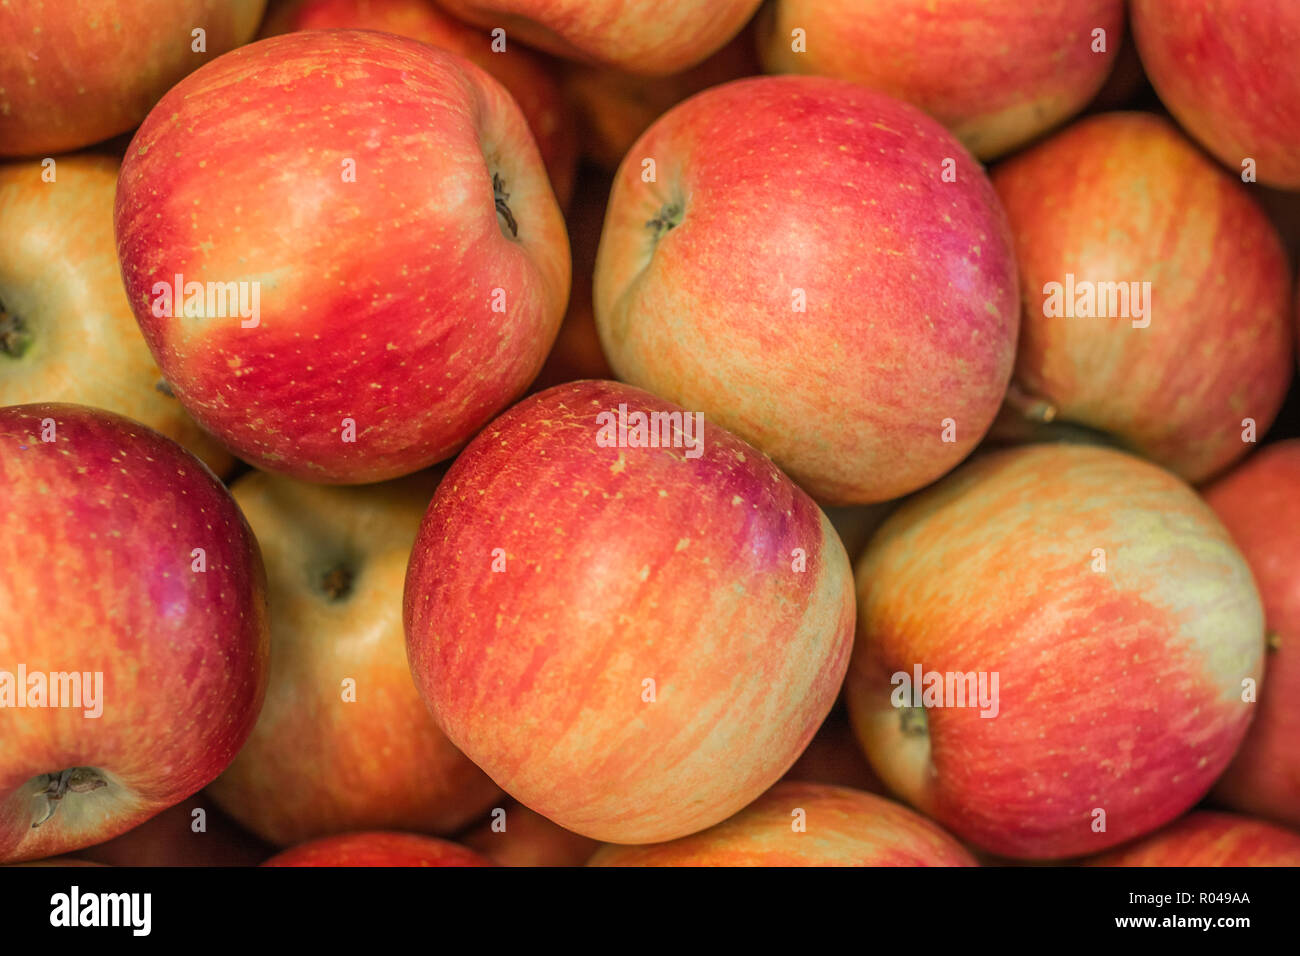 apples closeup. Fresh apples'Fuji' variety grown in the apple country South Tyrol, northern Italy. Apple suitable for cakes. Stock Photo